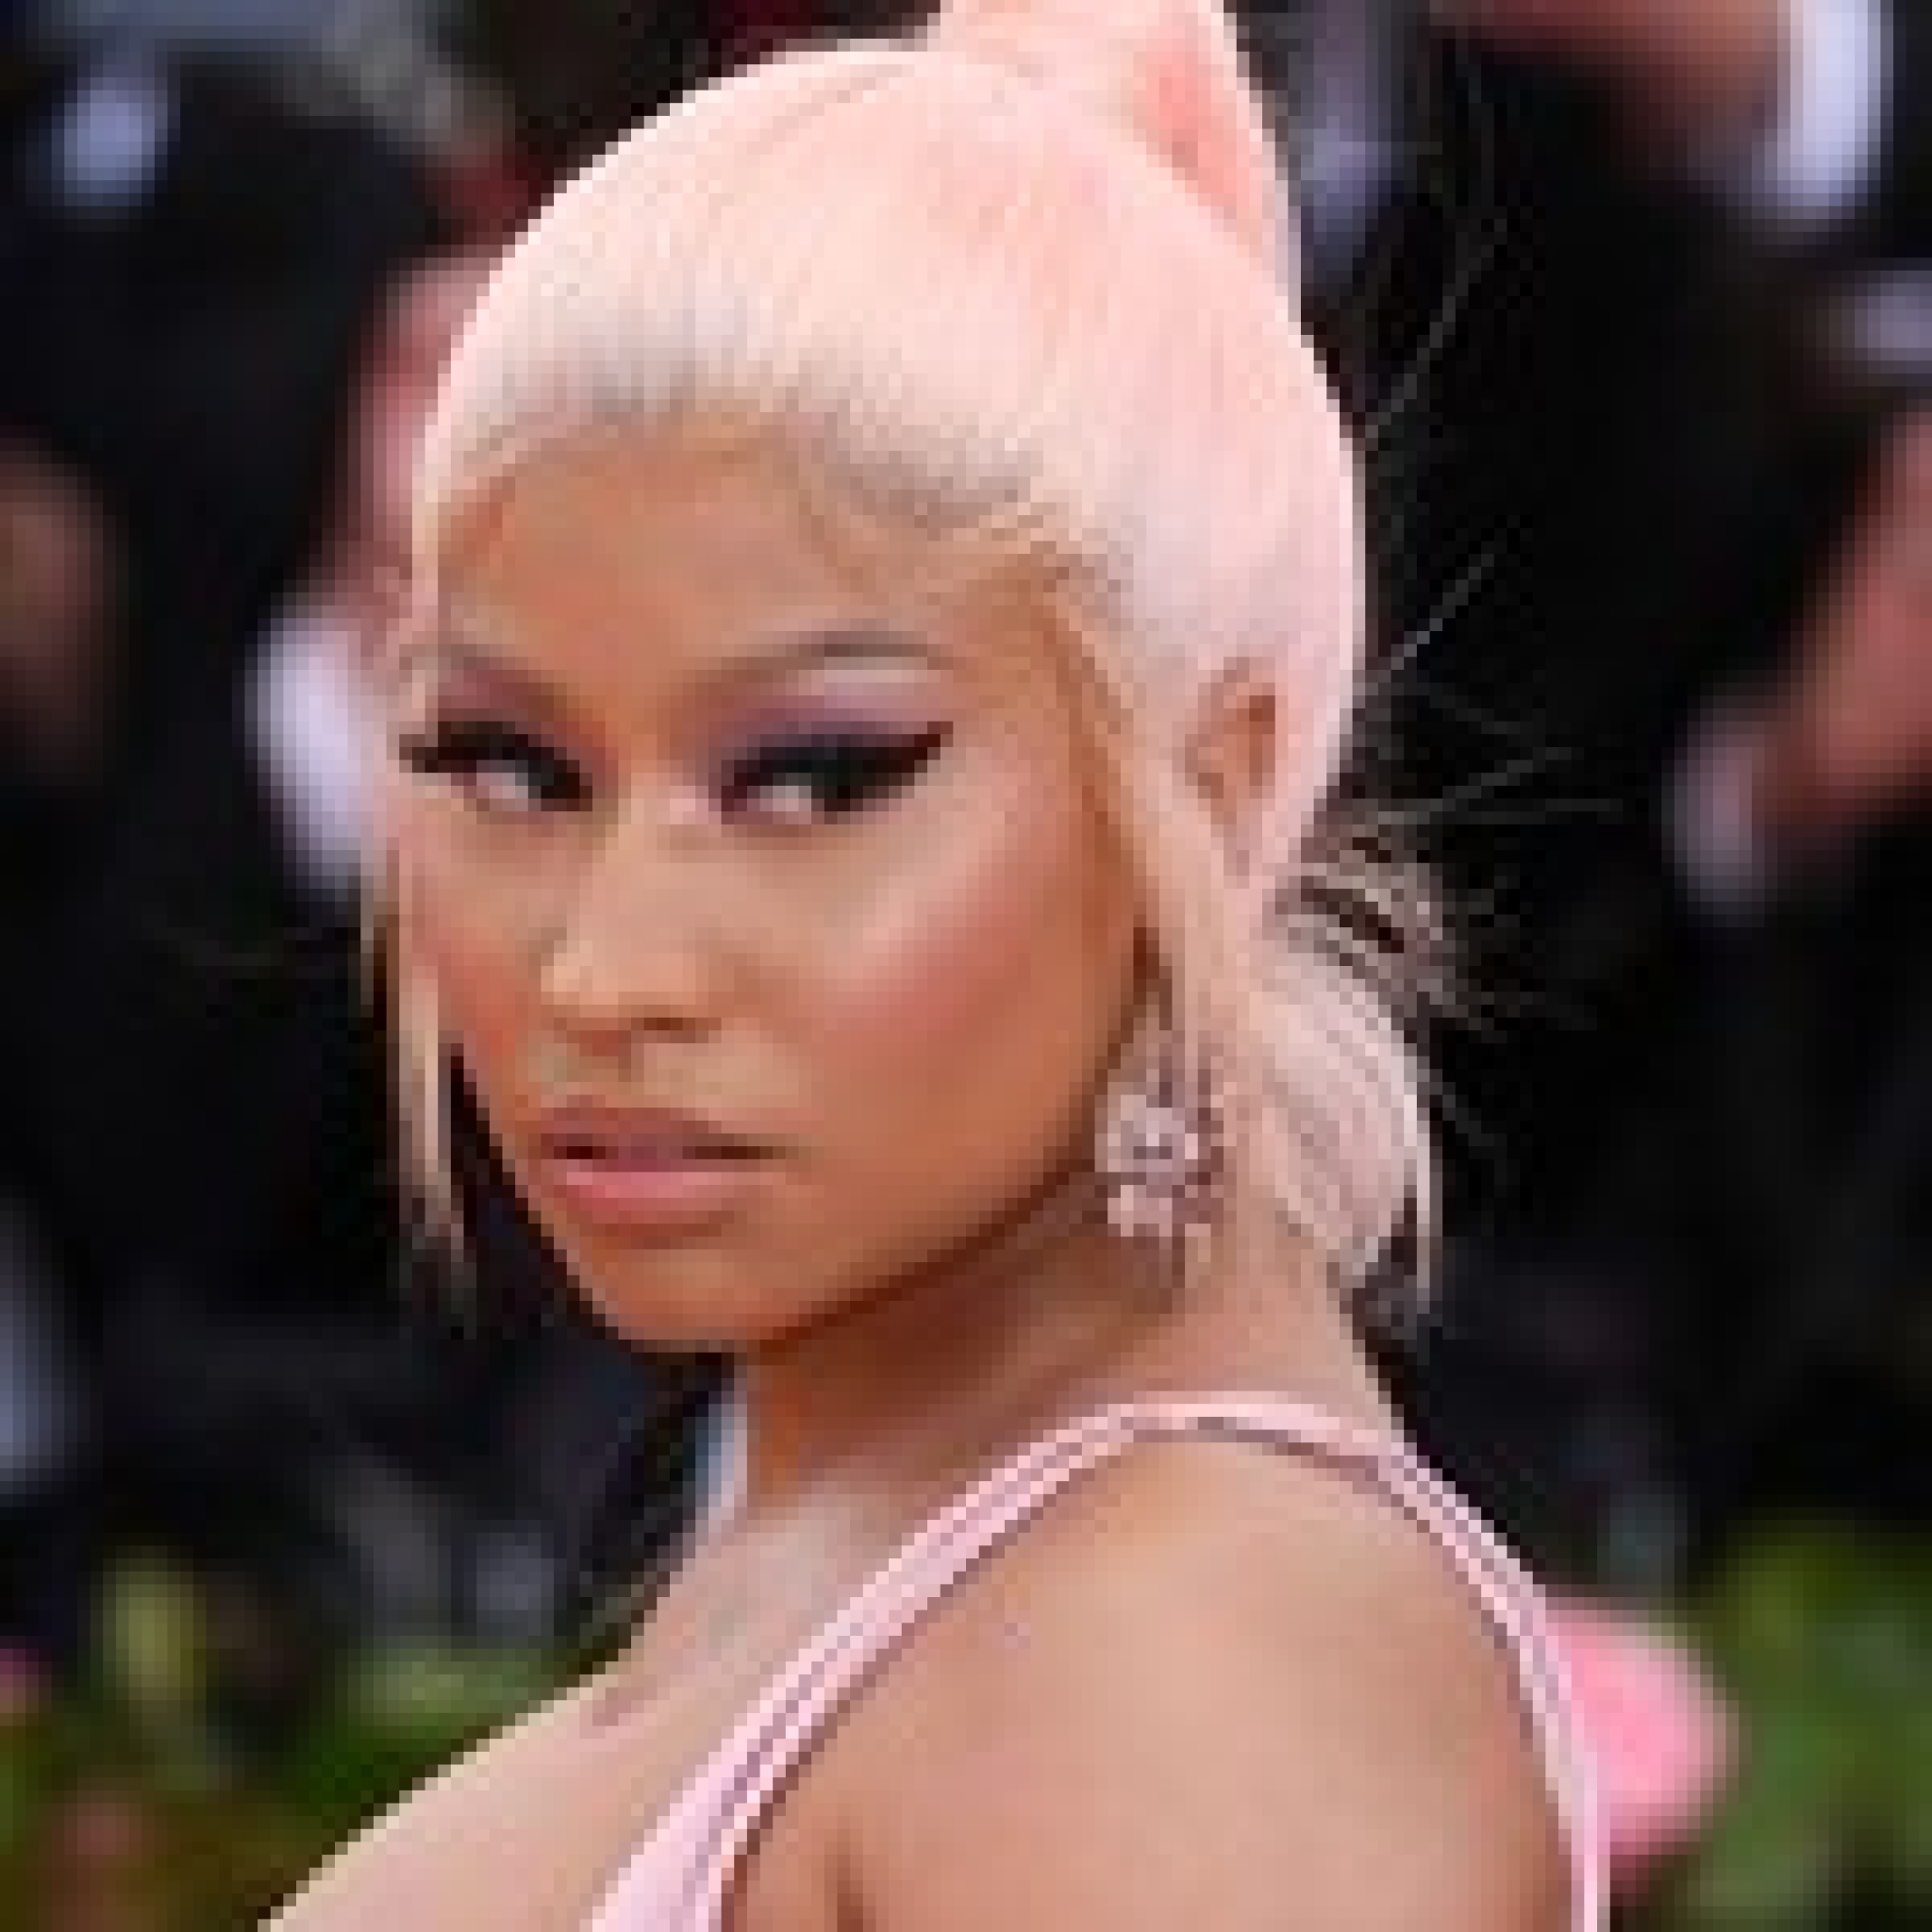 Nicki Minaj Opens Up About Her Father’s Death: ‘May His Soul Rest in Paradise’